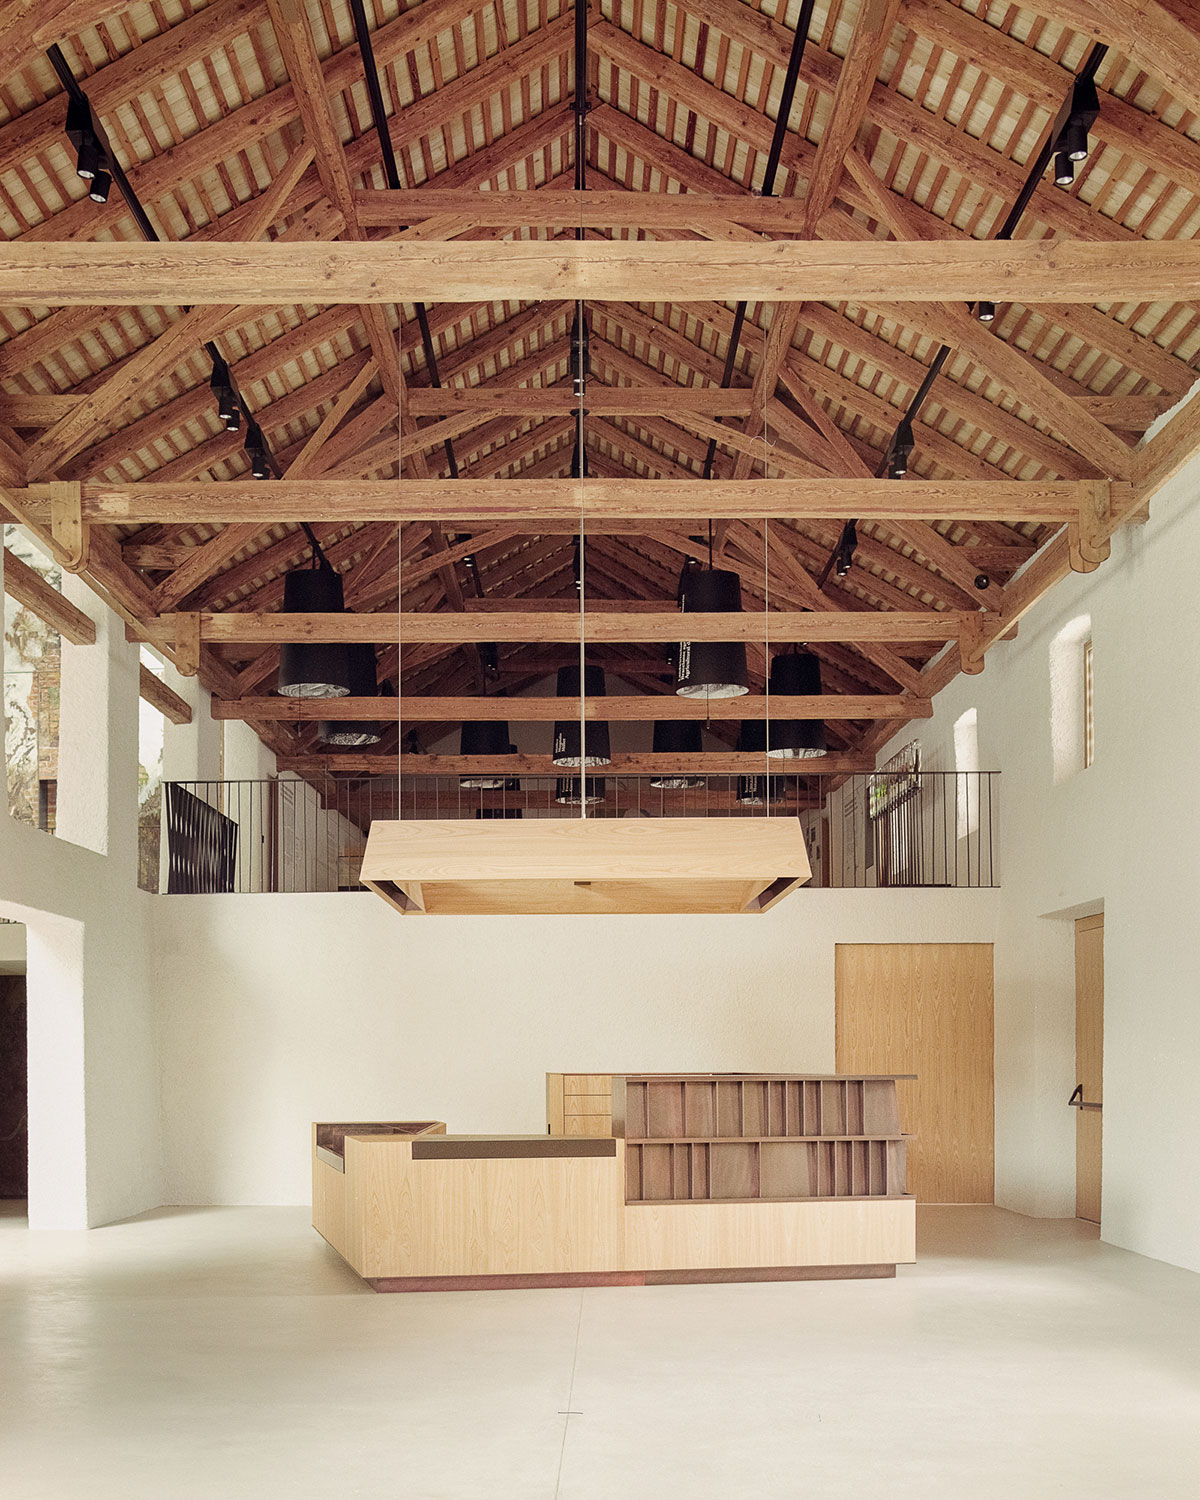 Expansion of Novacella Abbey Museum | MoDus Architects